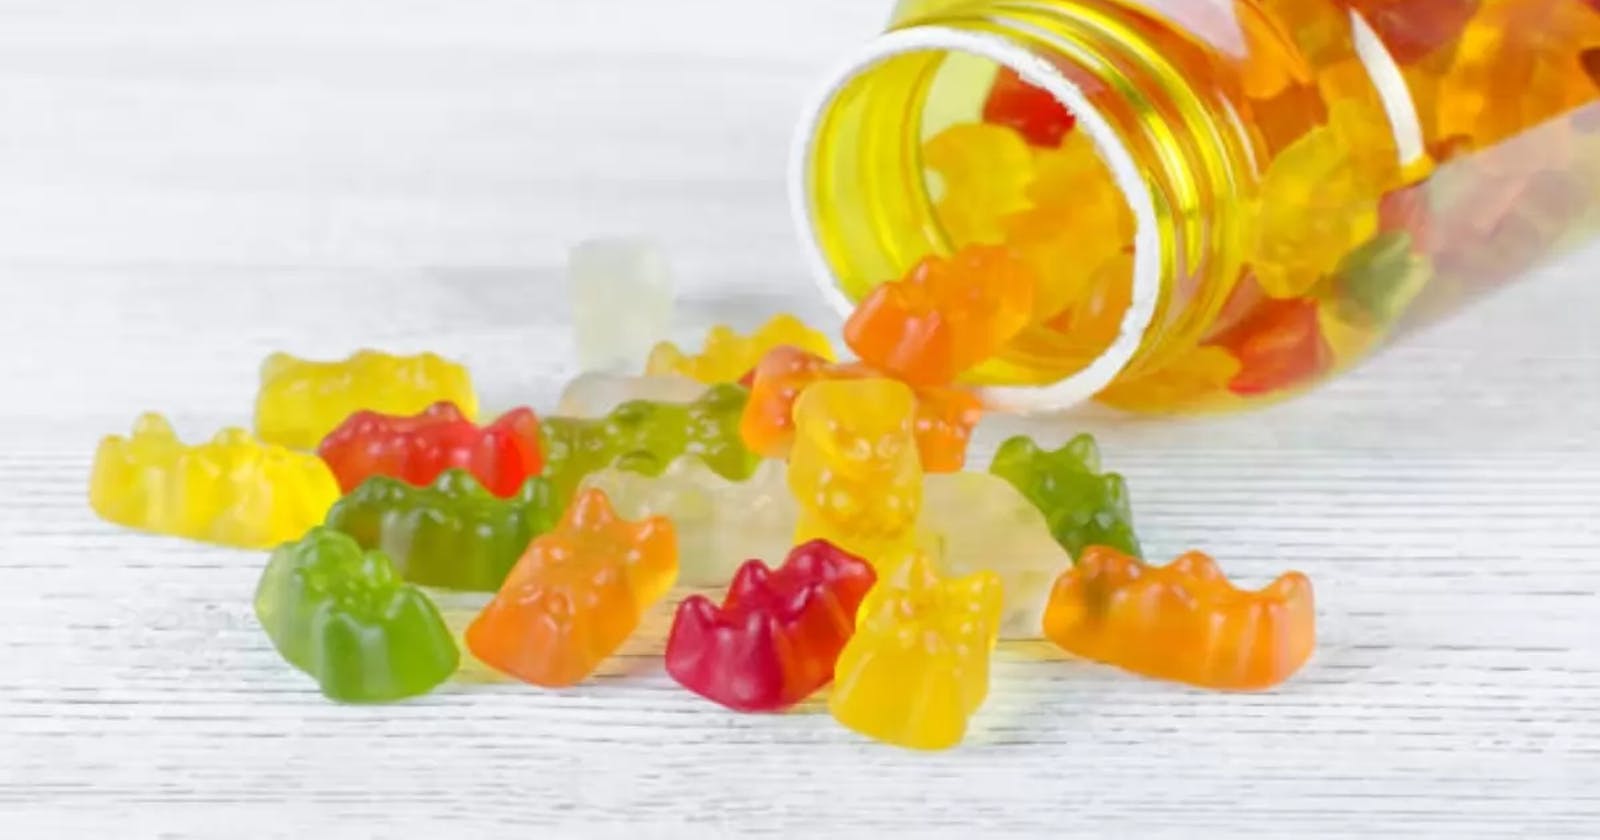 Super Health CBD Gummies - Effective Product Good For You, Where To Buy!